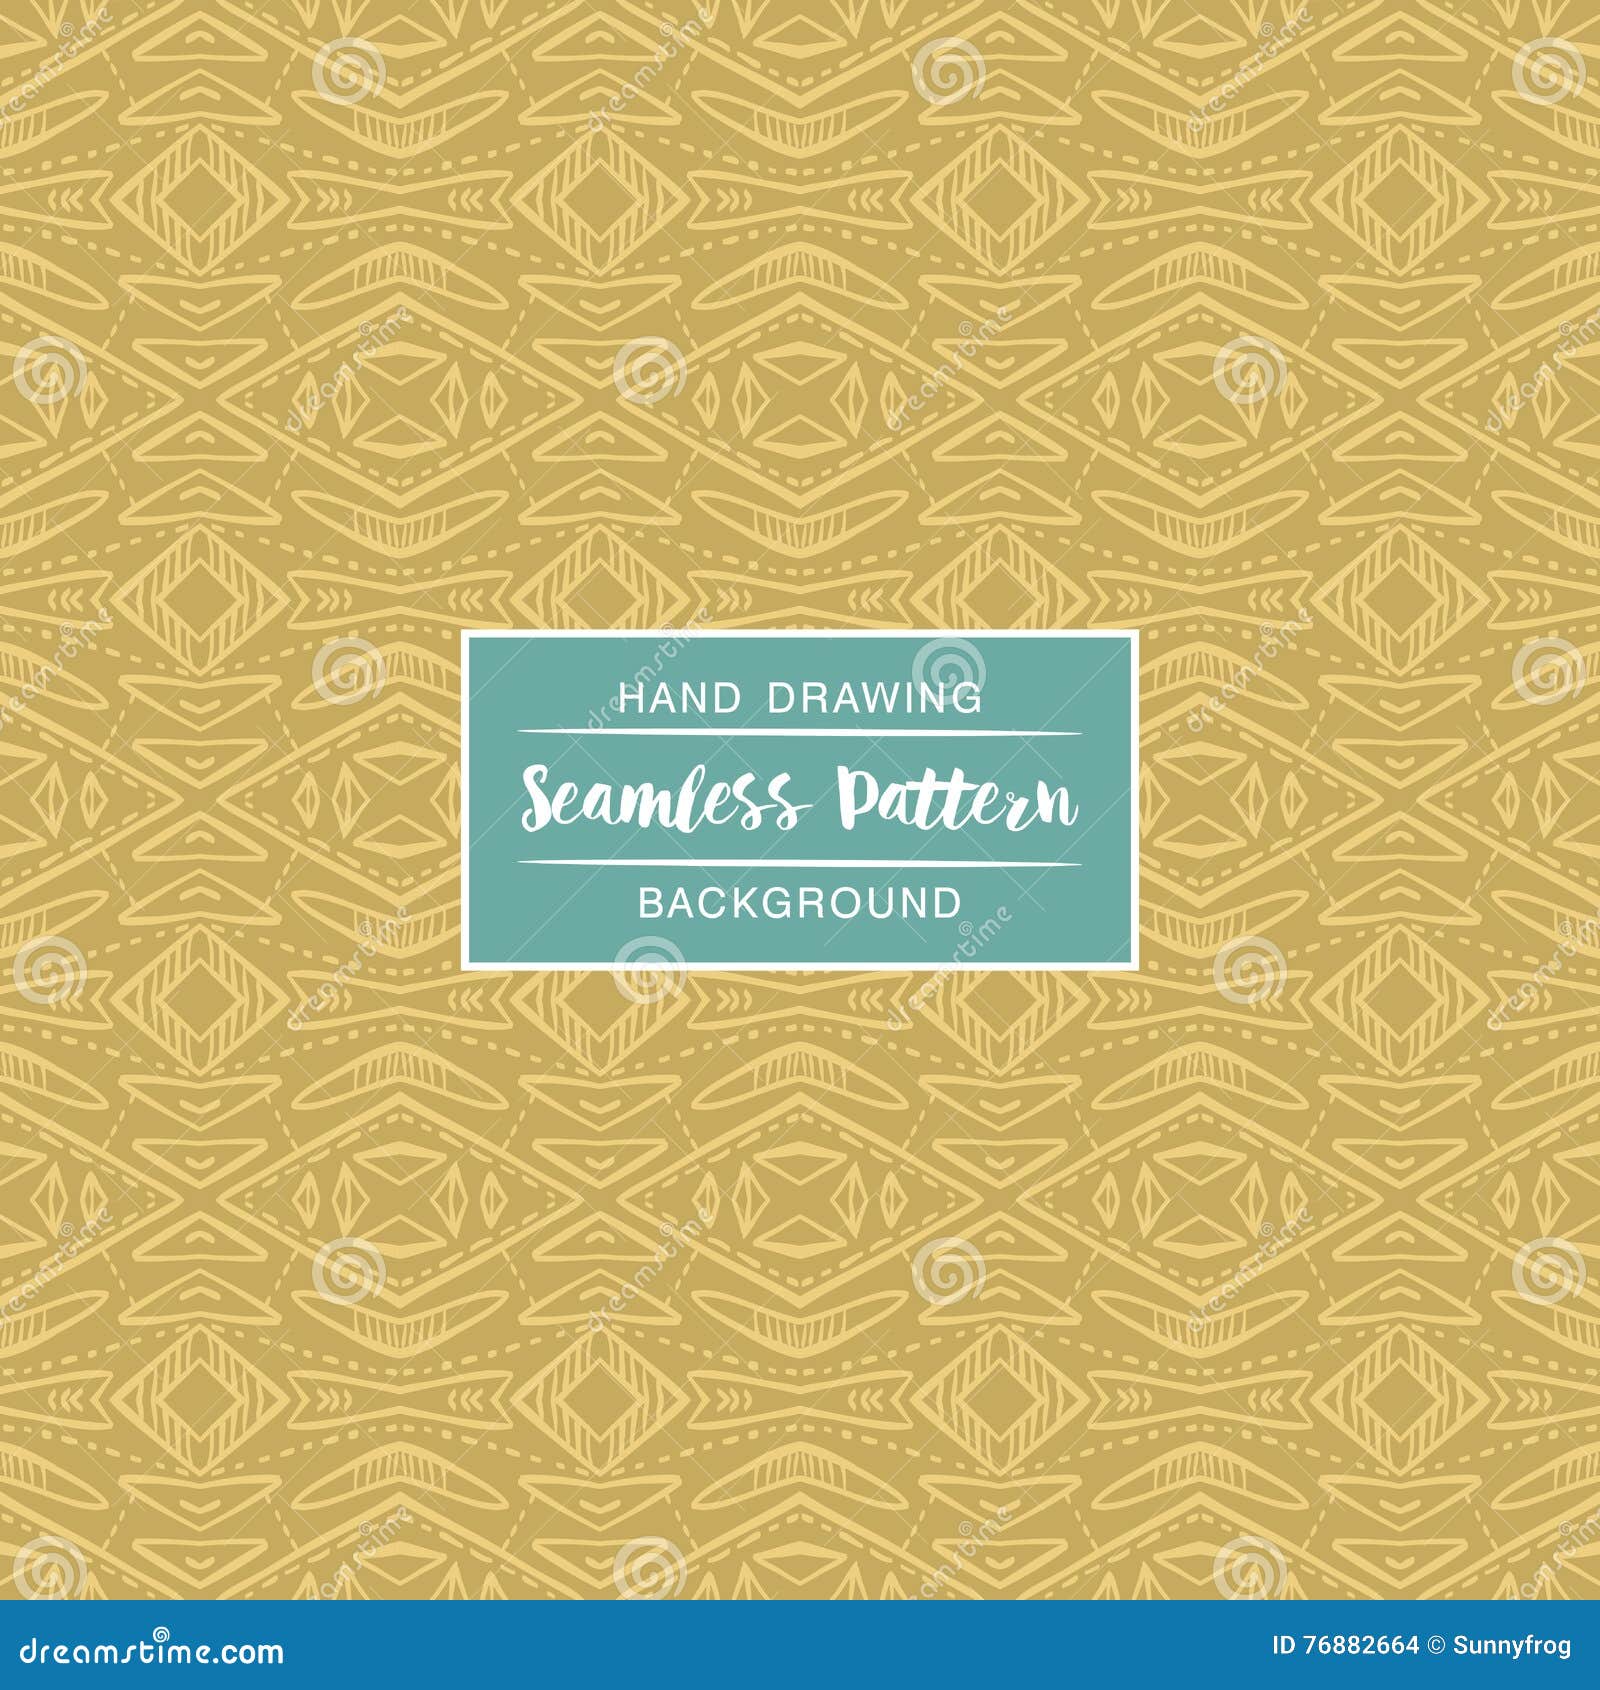 seamless pattern background. ideal for printing onto fabric